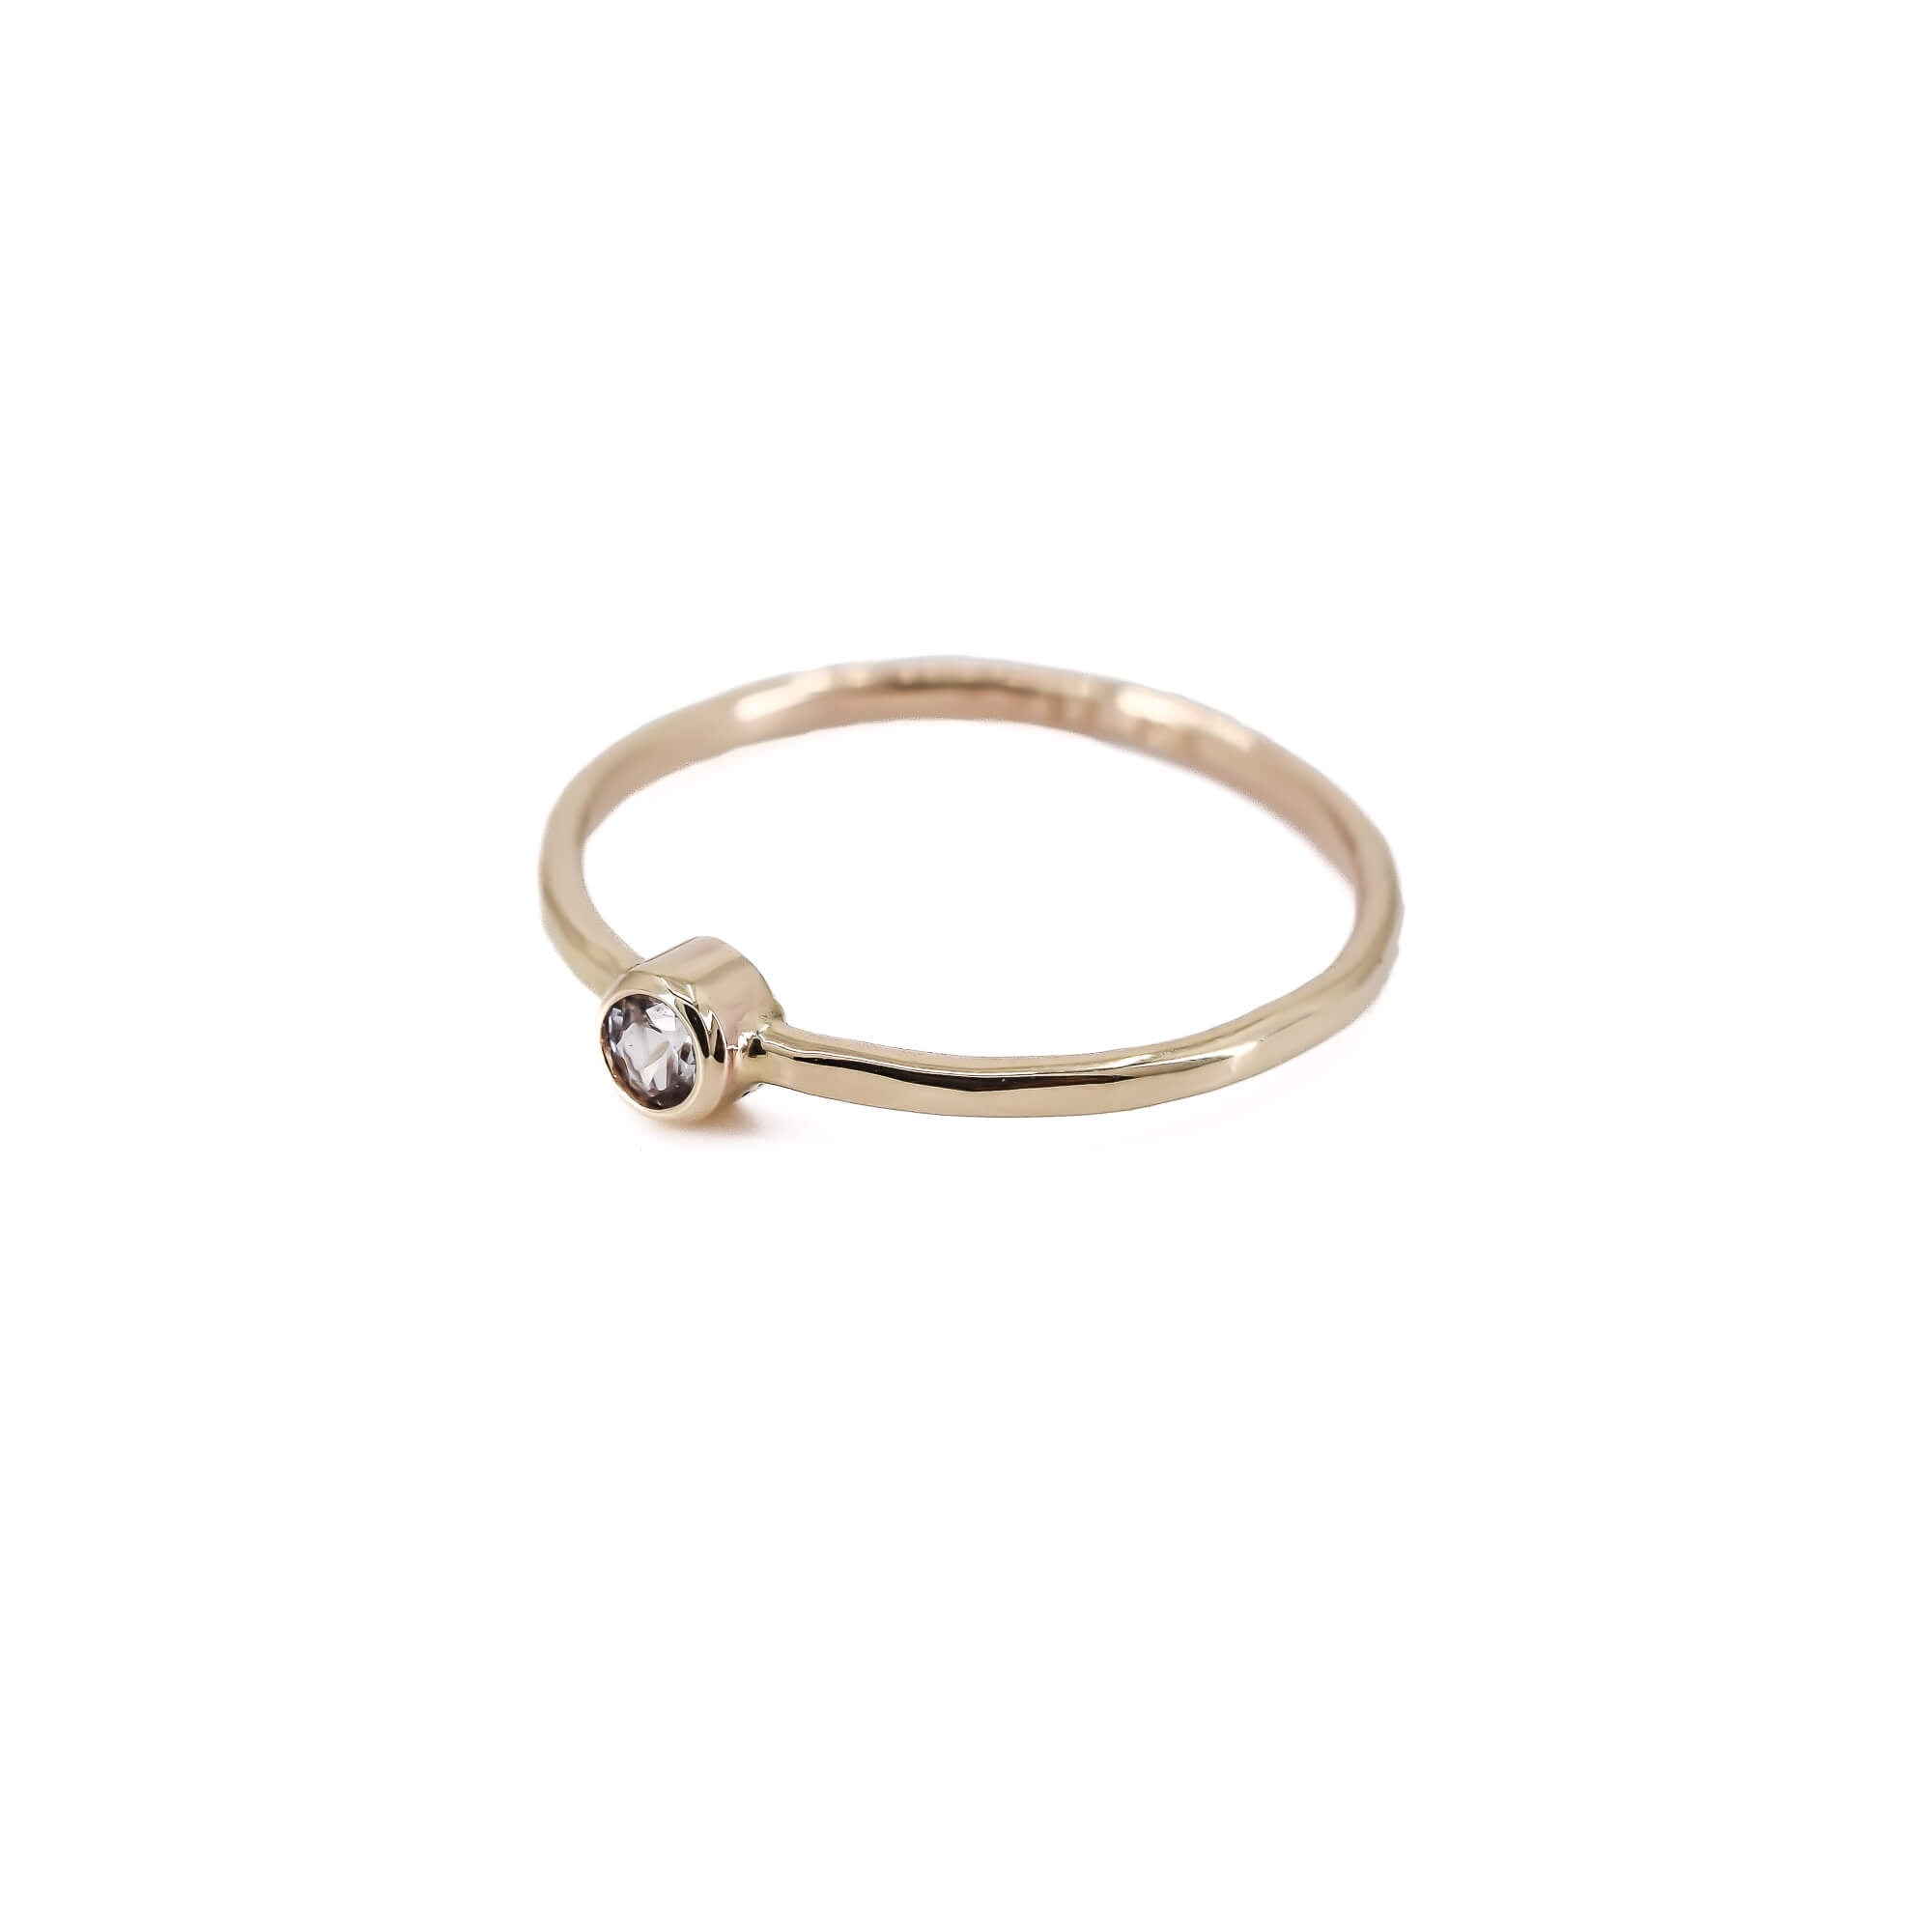 faceted, thin 14K yellow gold stacking ring with white sapphire